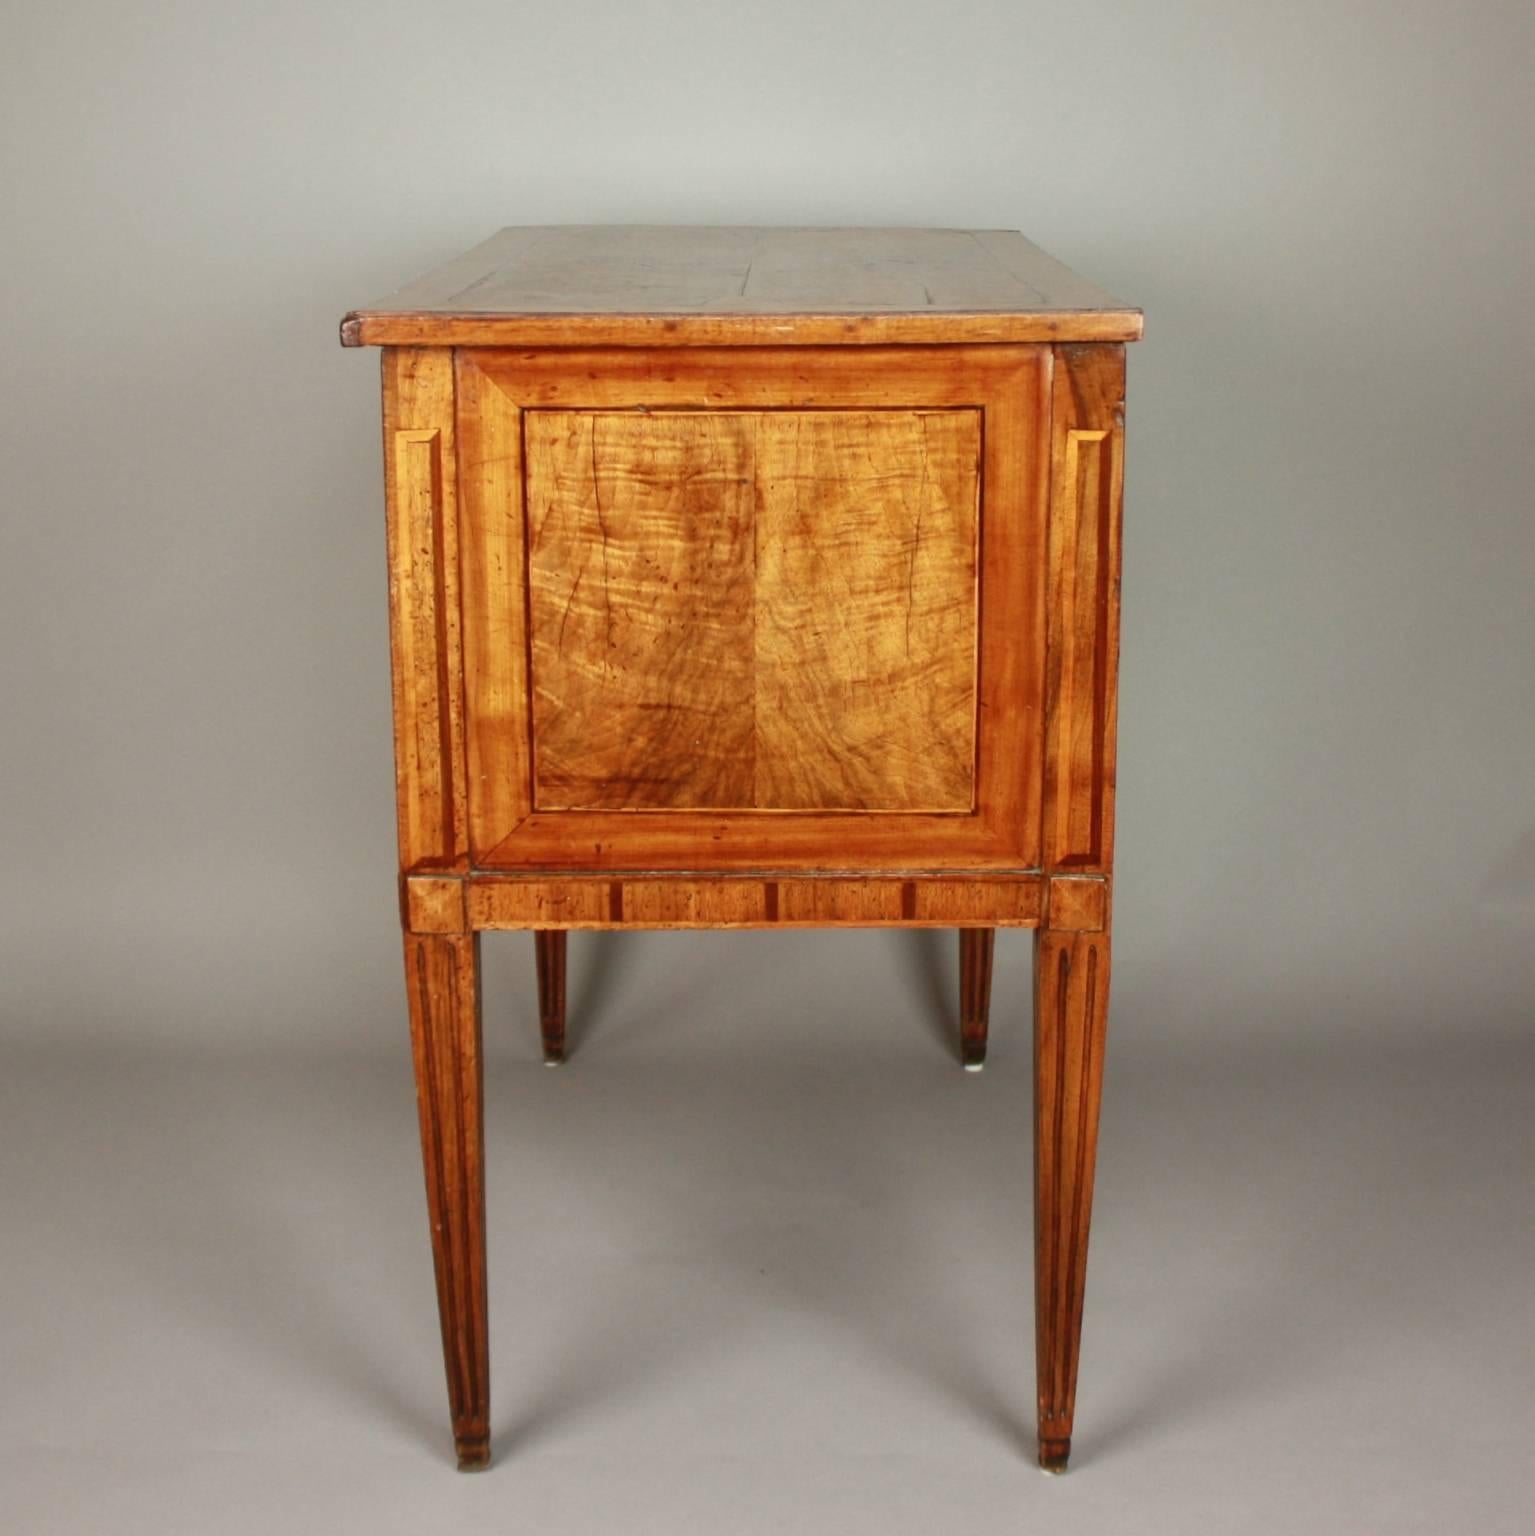 Small German Neoclassical Marquetry Commode or Chest of Drawer, 18th Century (Deutsch)